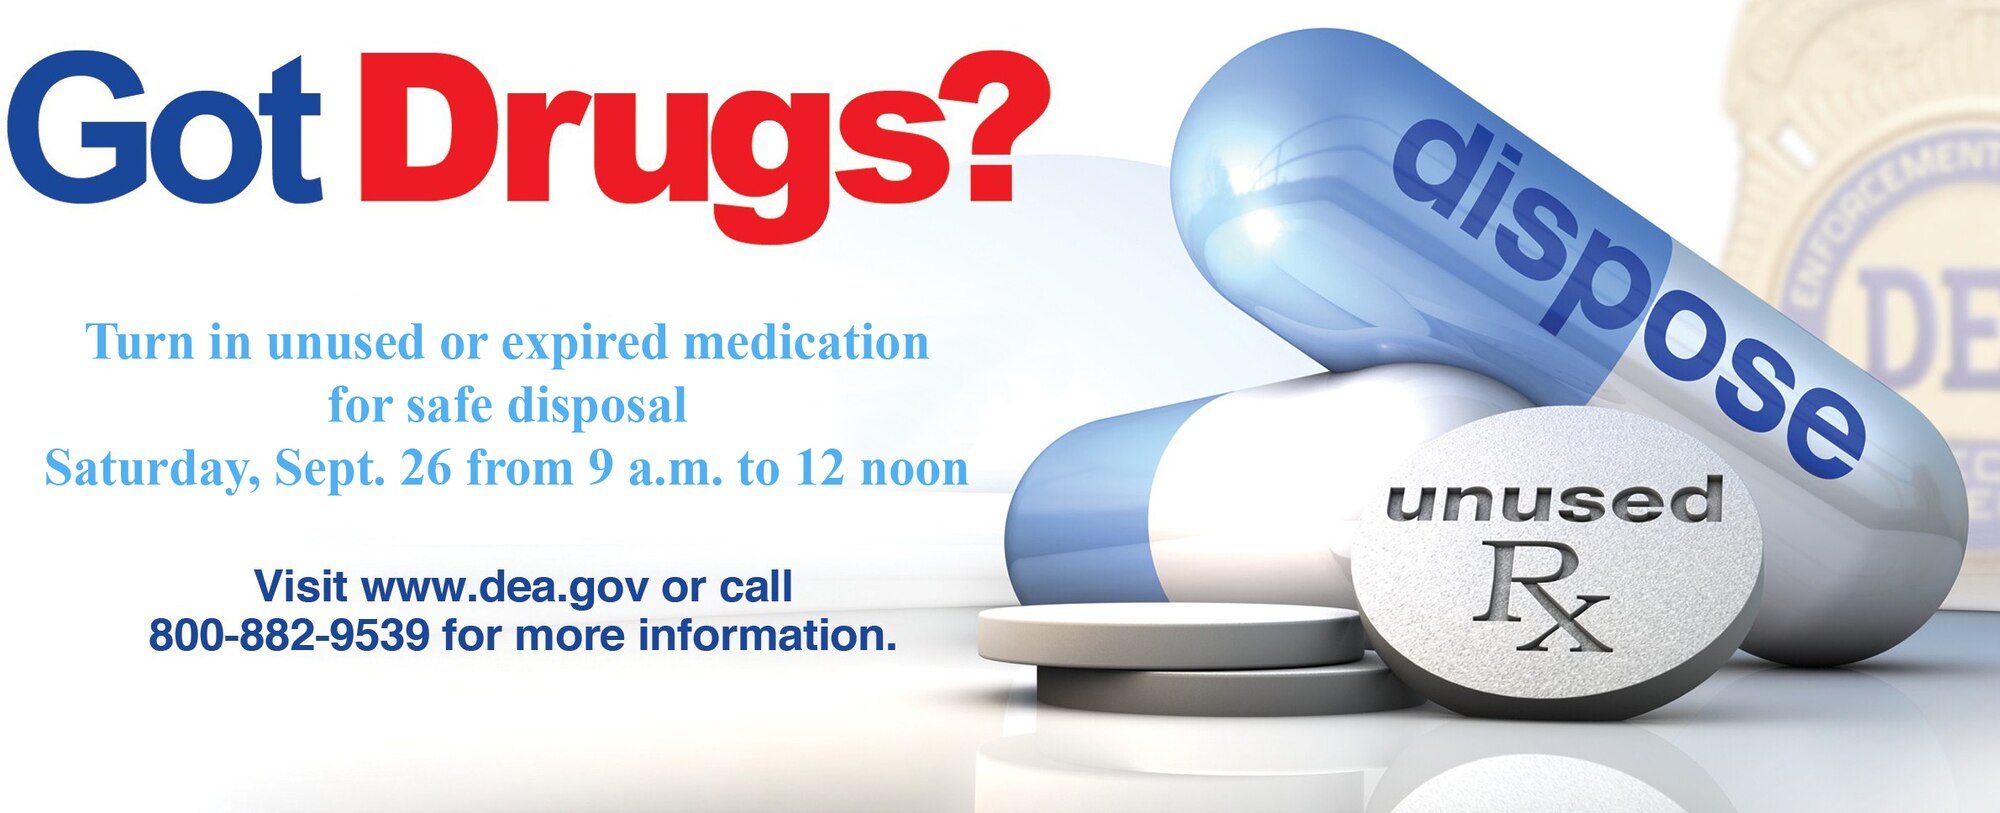 The Hanscom Prescription Drug Take-Back Day aims to provide a safe, convenient, and responsible means of disposing of prescription drugs, while also educating the general public about the potential for abuse of medications. (Graphic by the Drug Enforcement Administration)